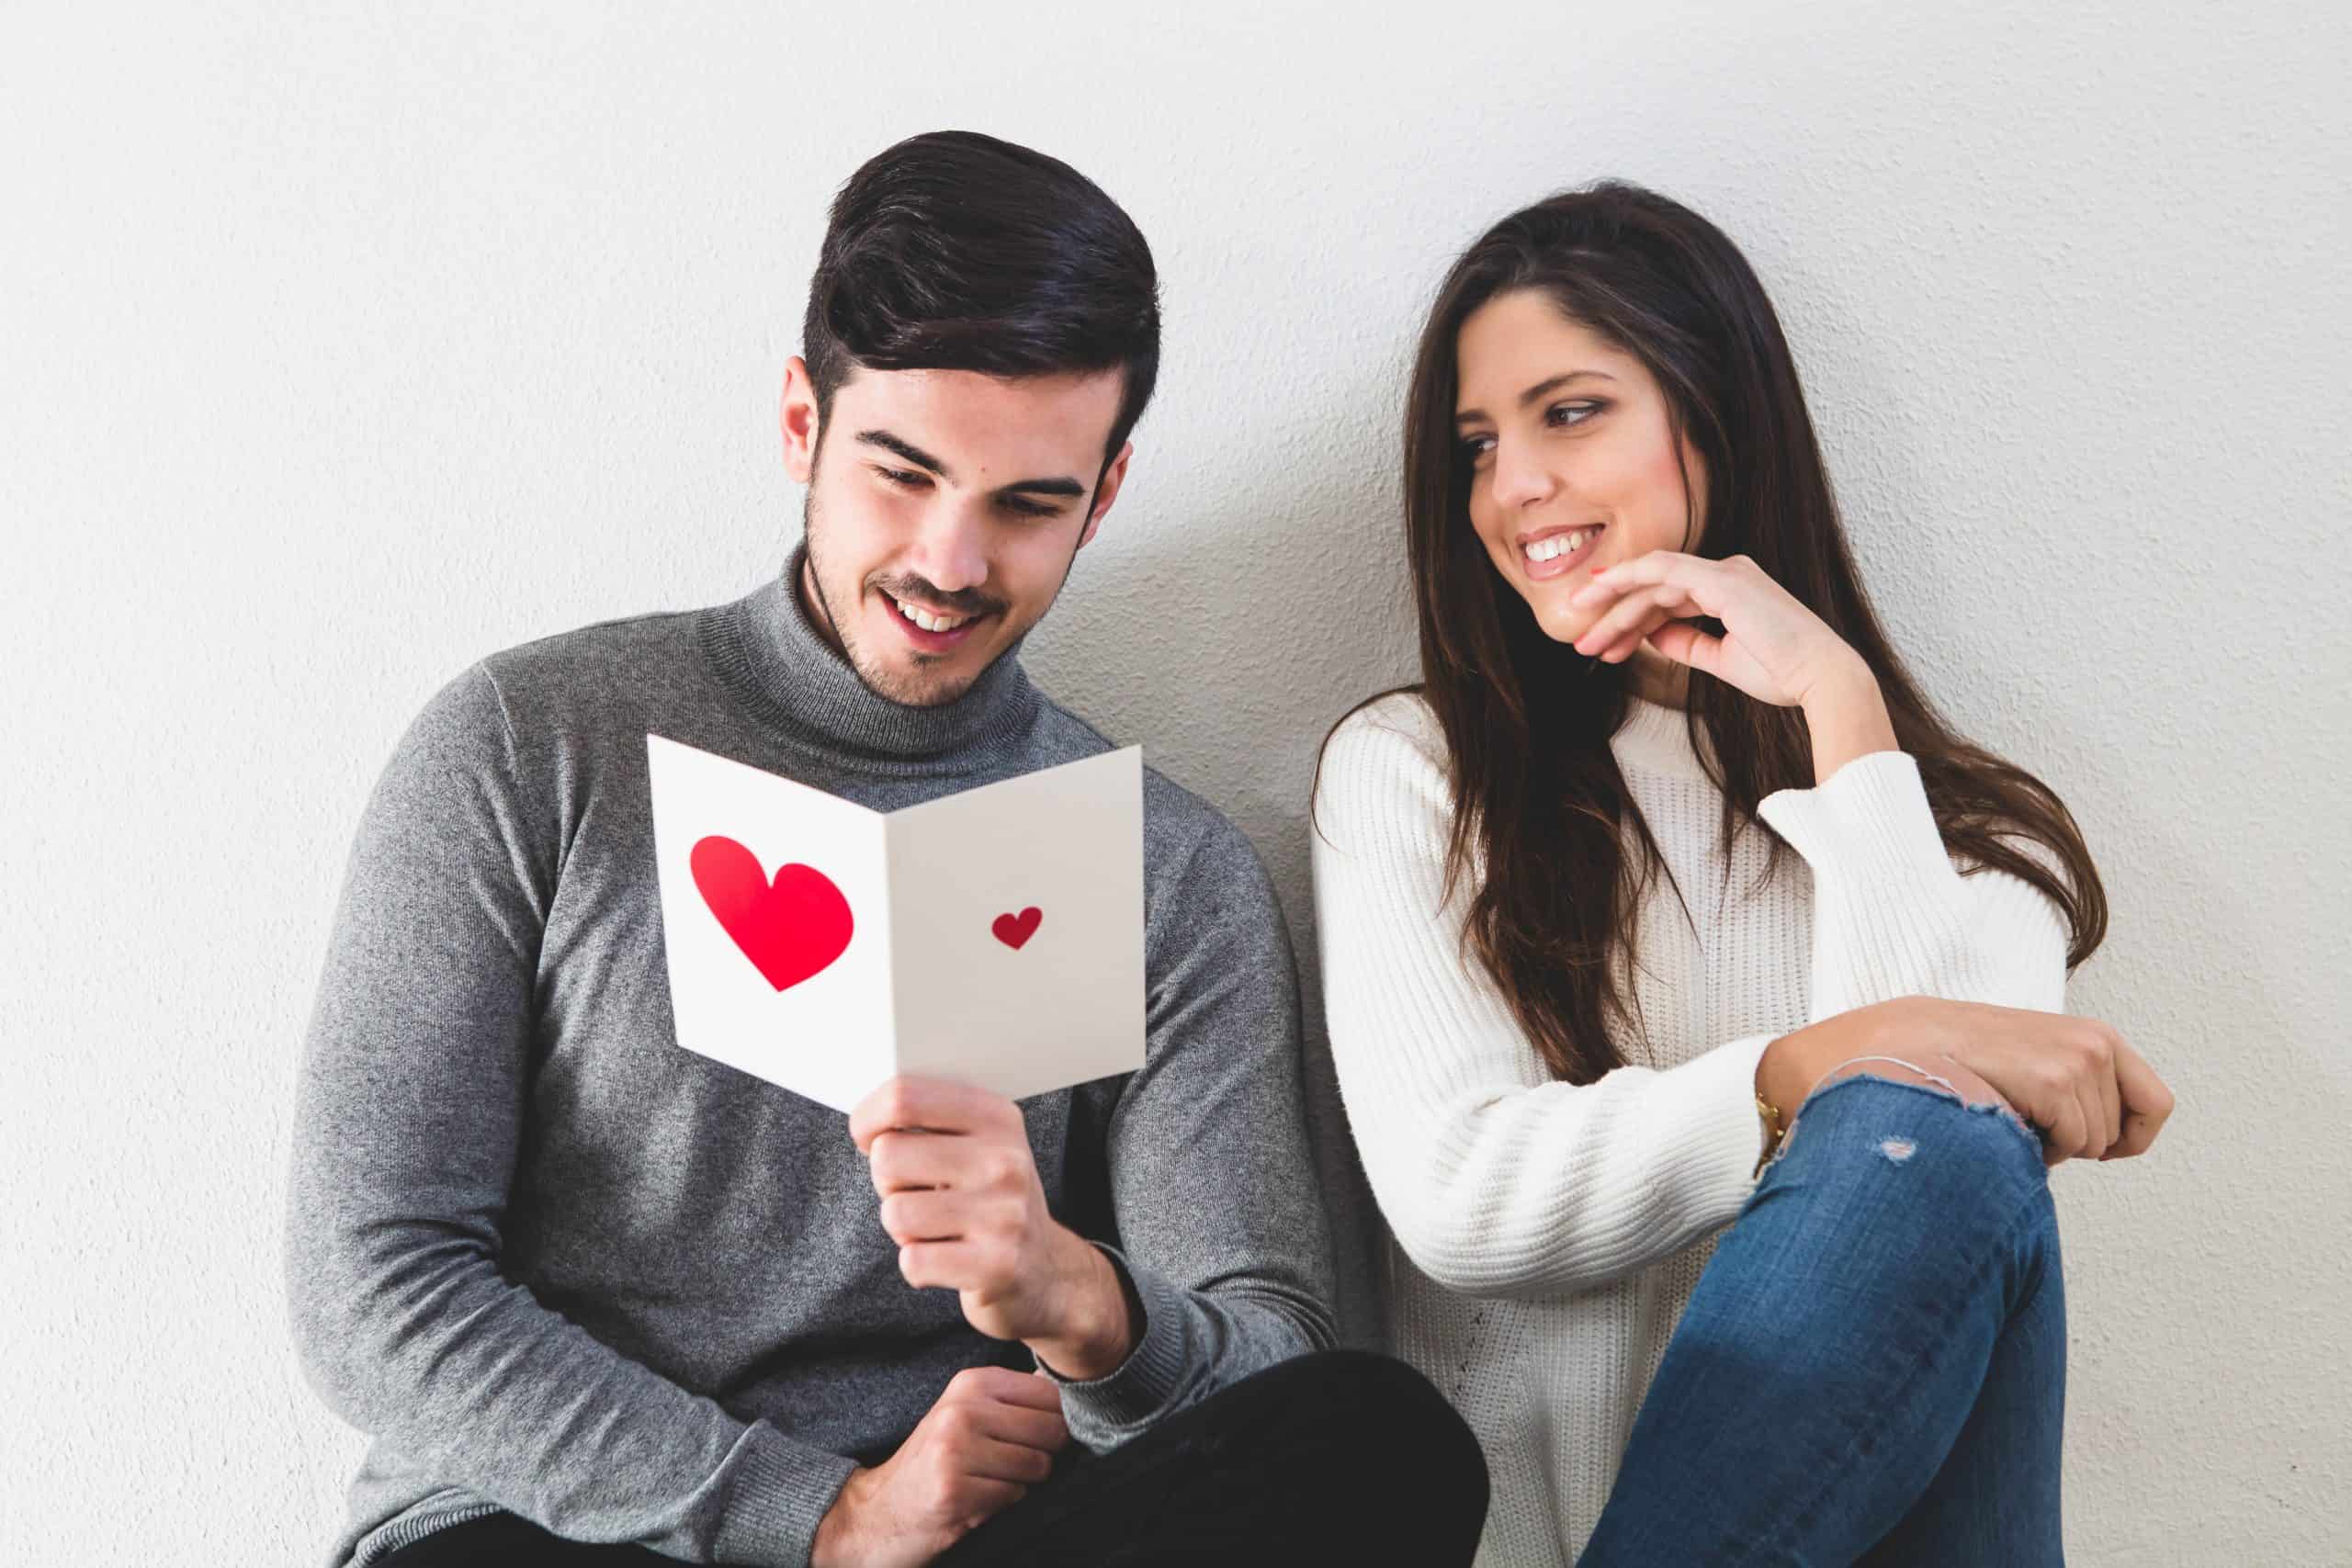 Games for Adults on Valentines Day: Heartfelt Trivia and Personal Challenges